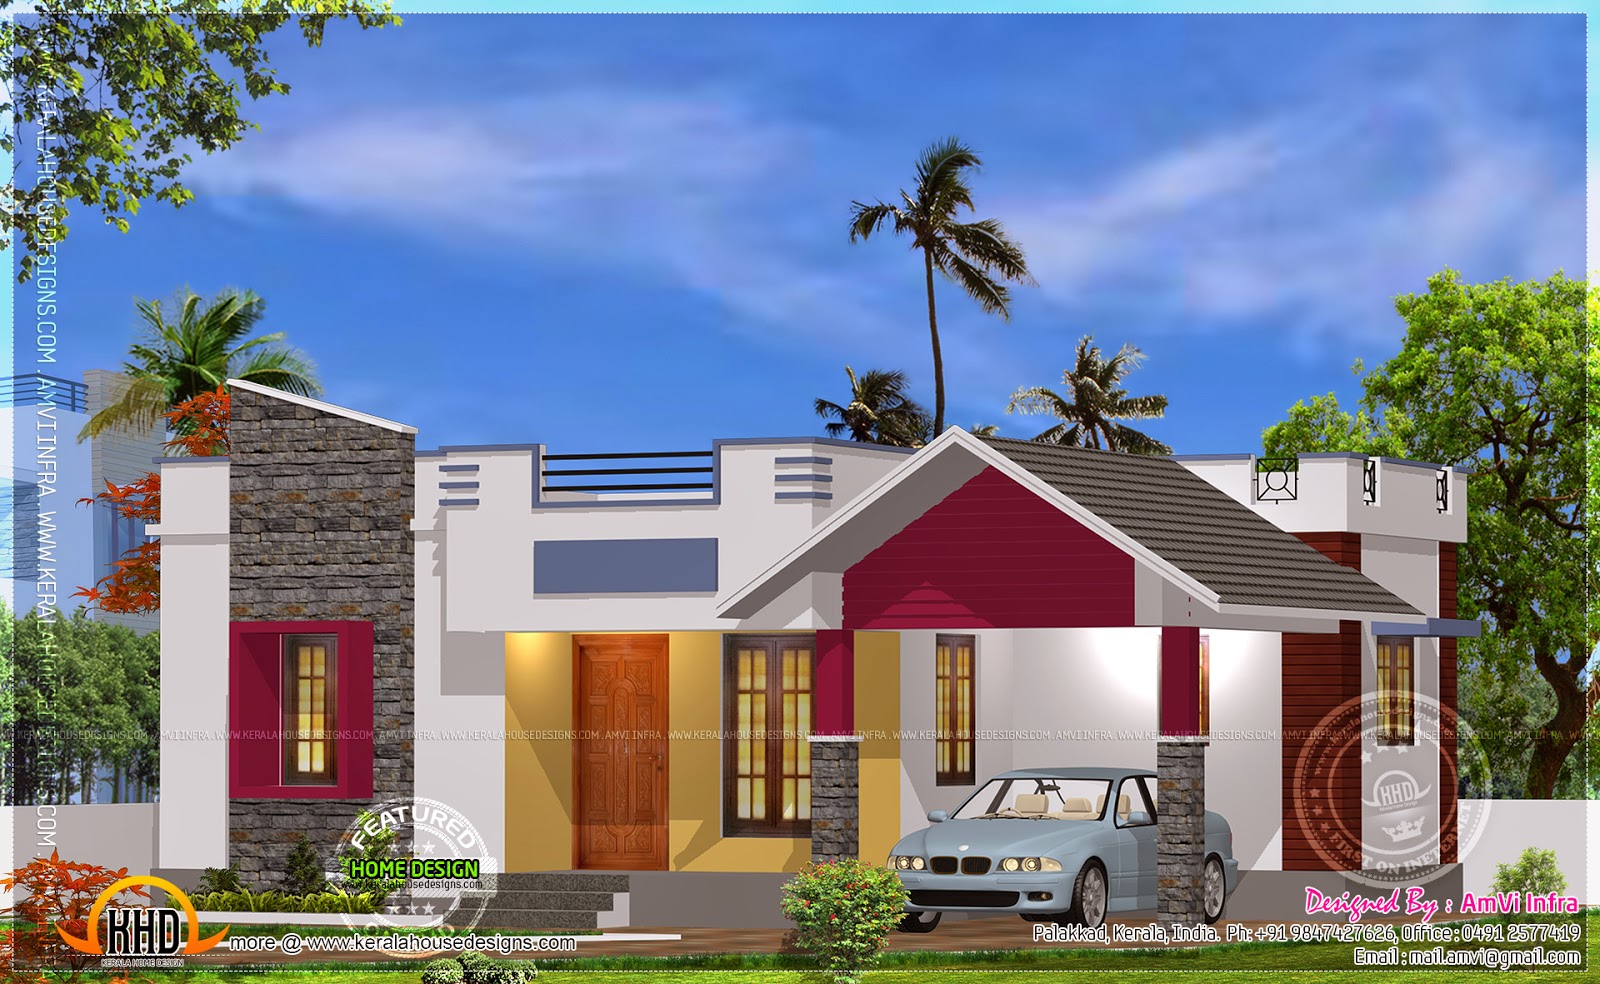 Stylish 900 Sq  Ft  New 2 Bedroom Kerala  Home  Design  with 